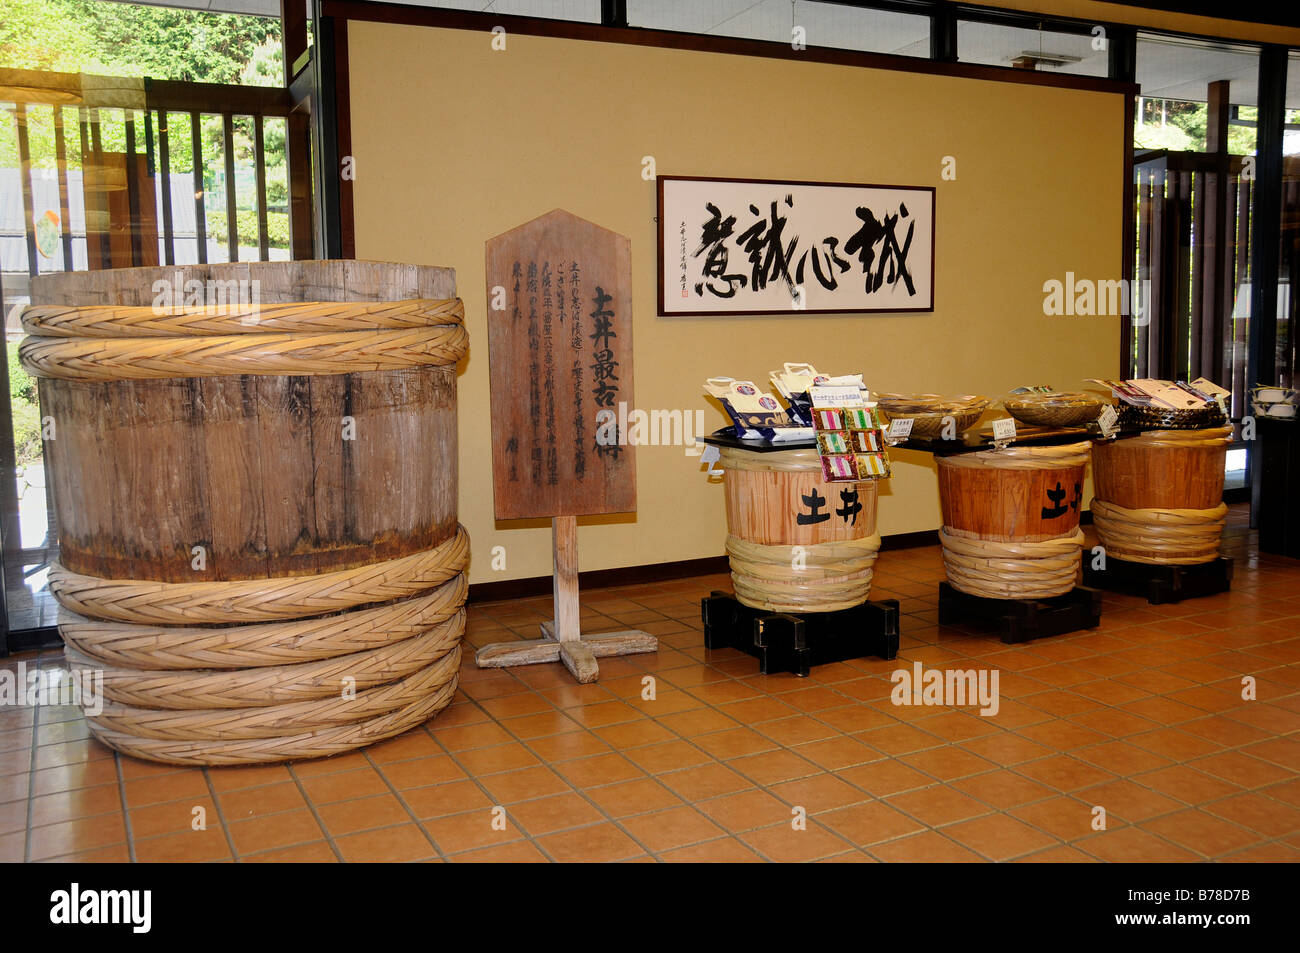 Barrels for production of marinated vegetables, Ohara, Japan, Asia Stock Photo